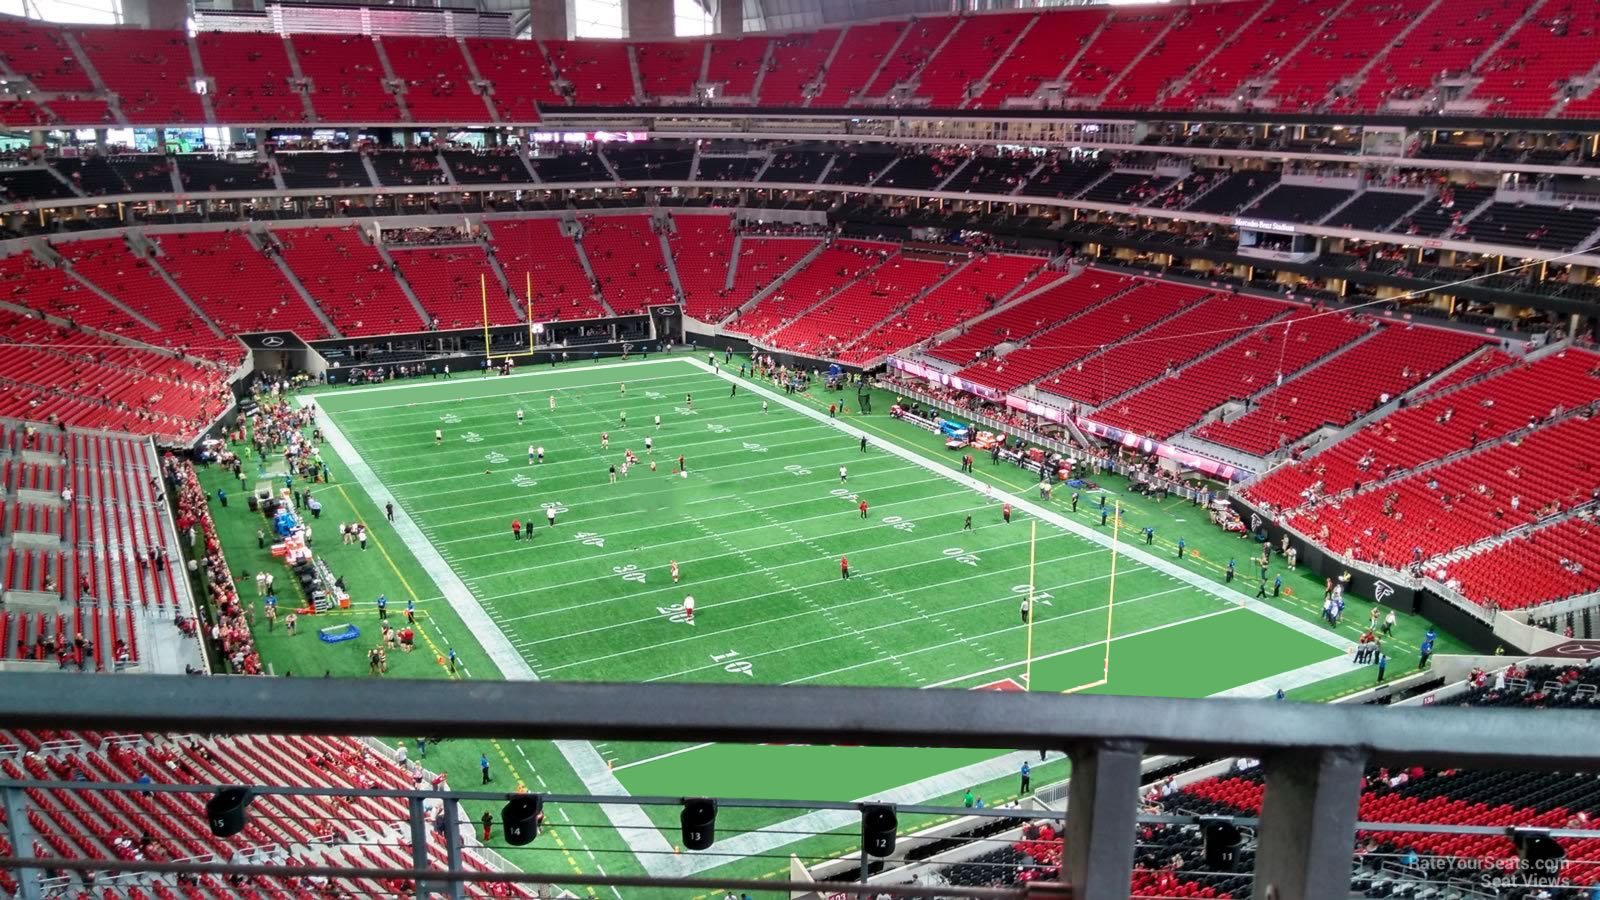 section 301, row 4 seat view  for football - mercedes-benz stadium